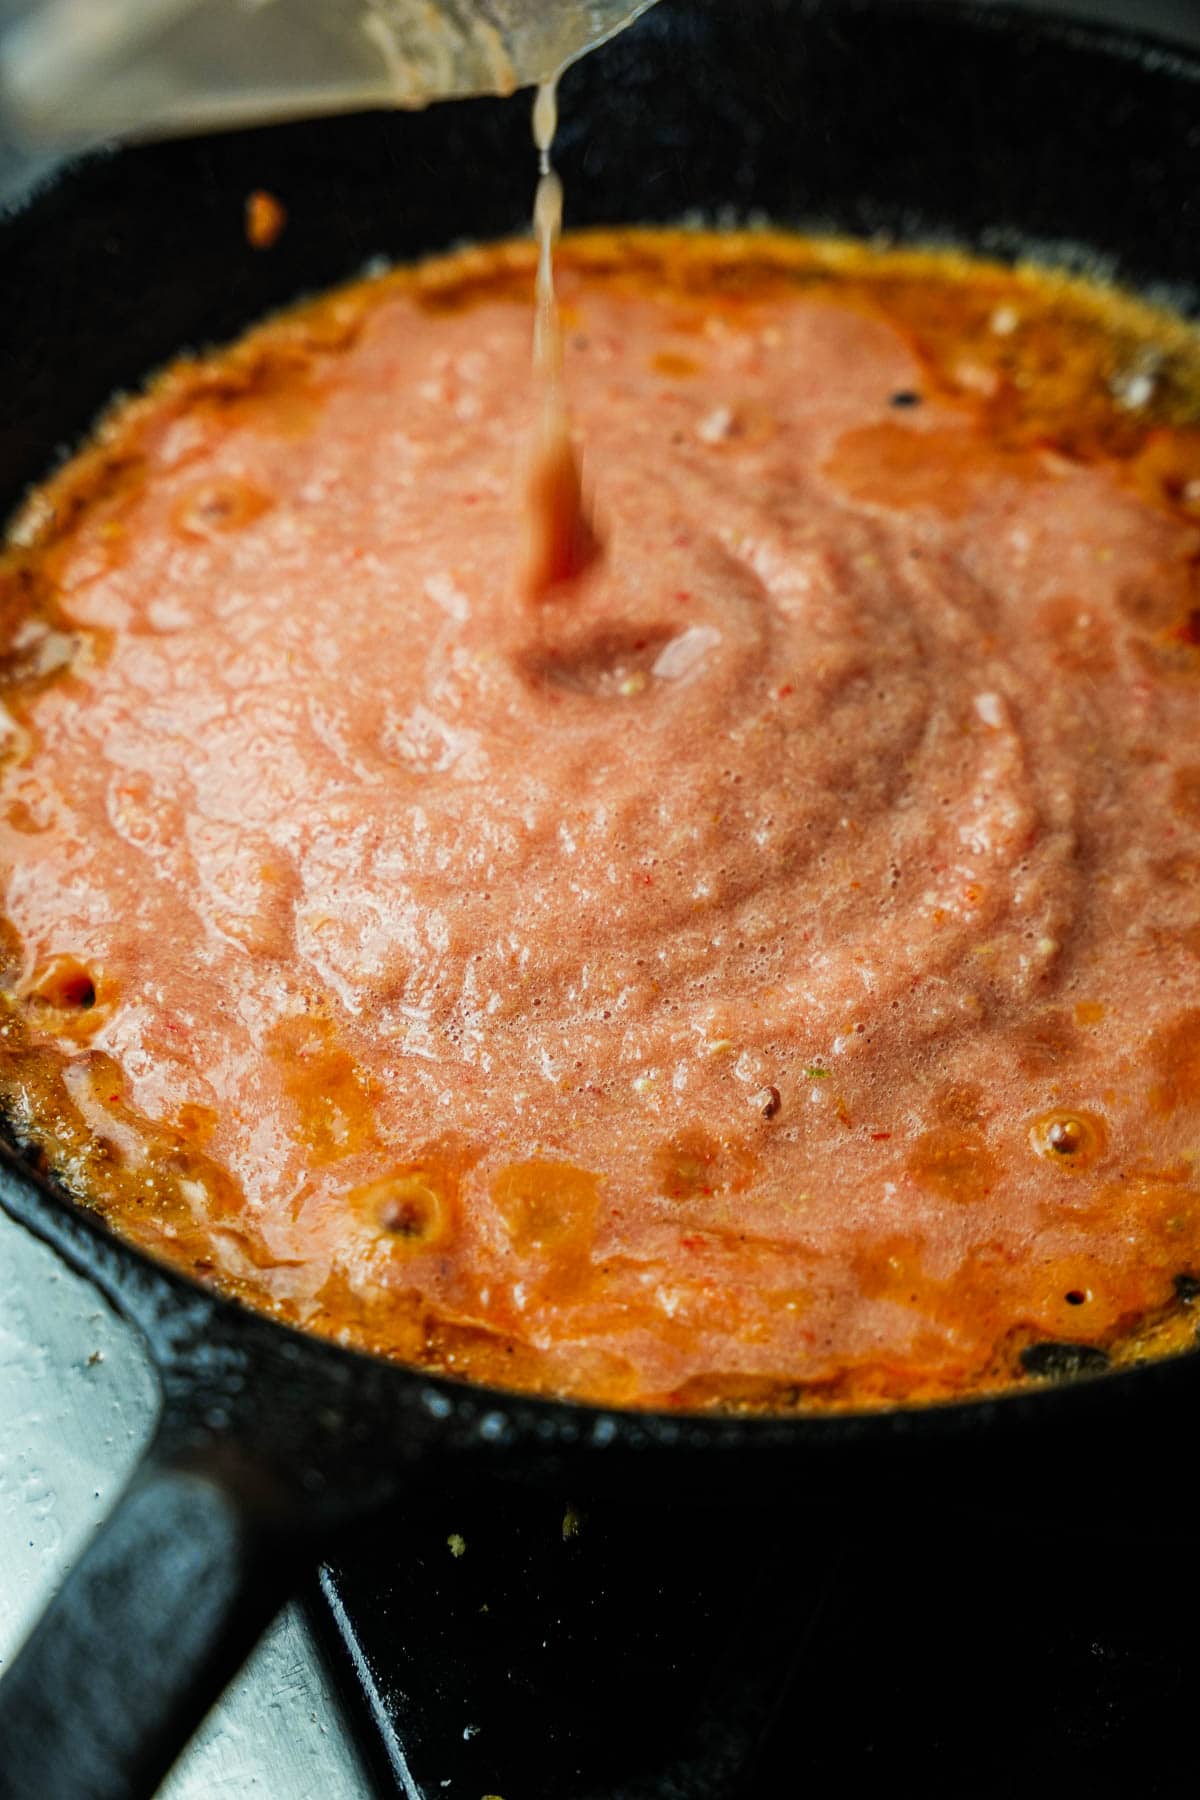 The spice paste is cooking in hot oil in a cast iron skillet.